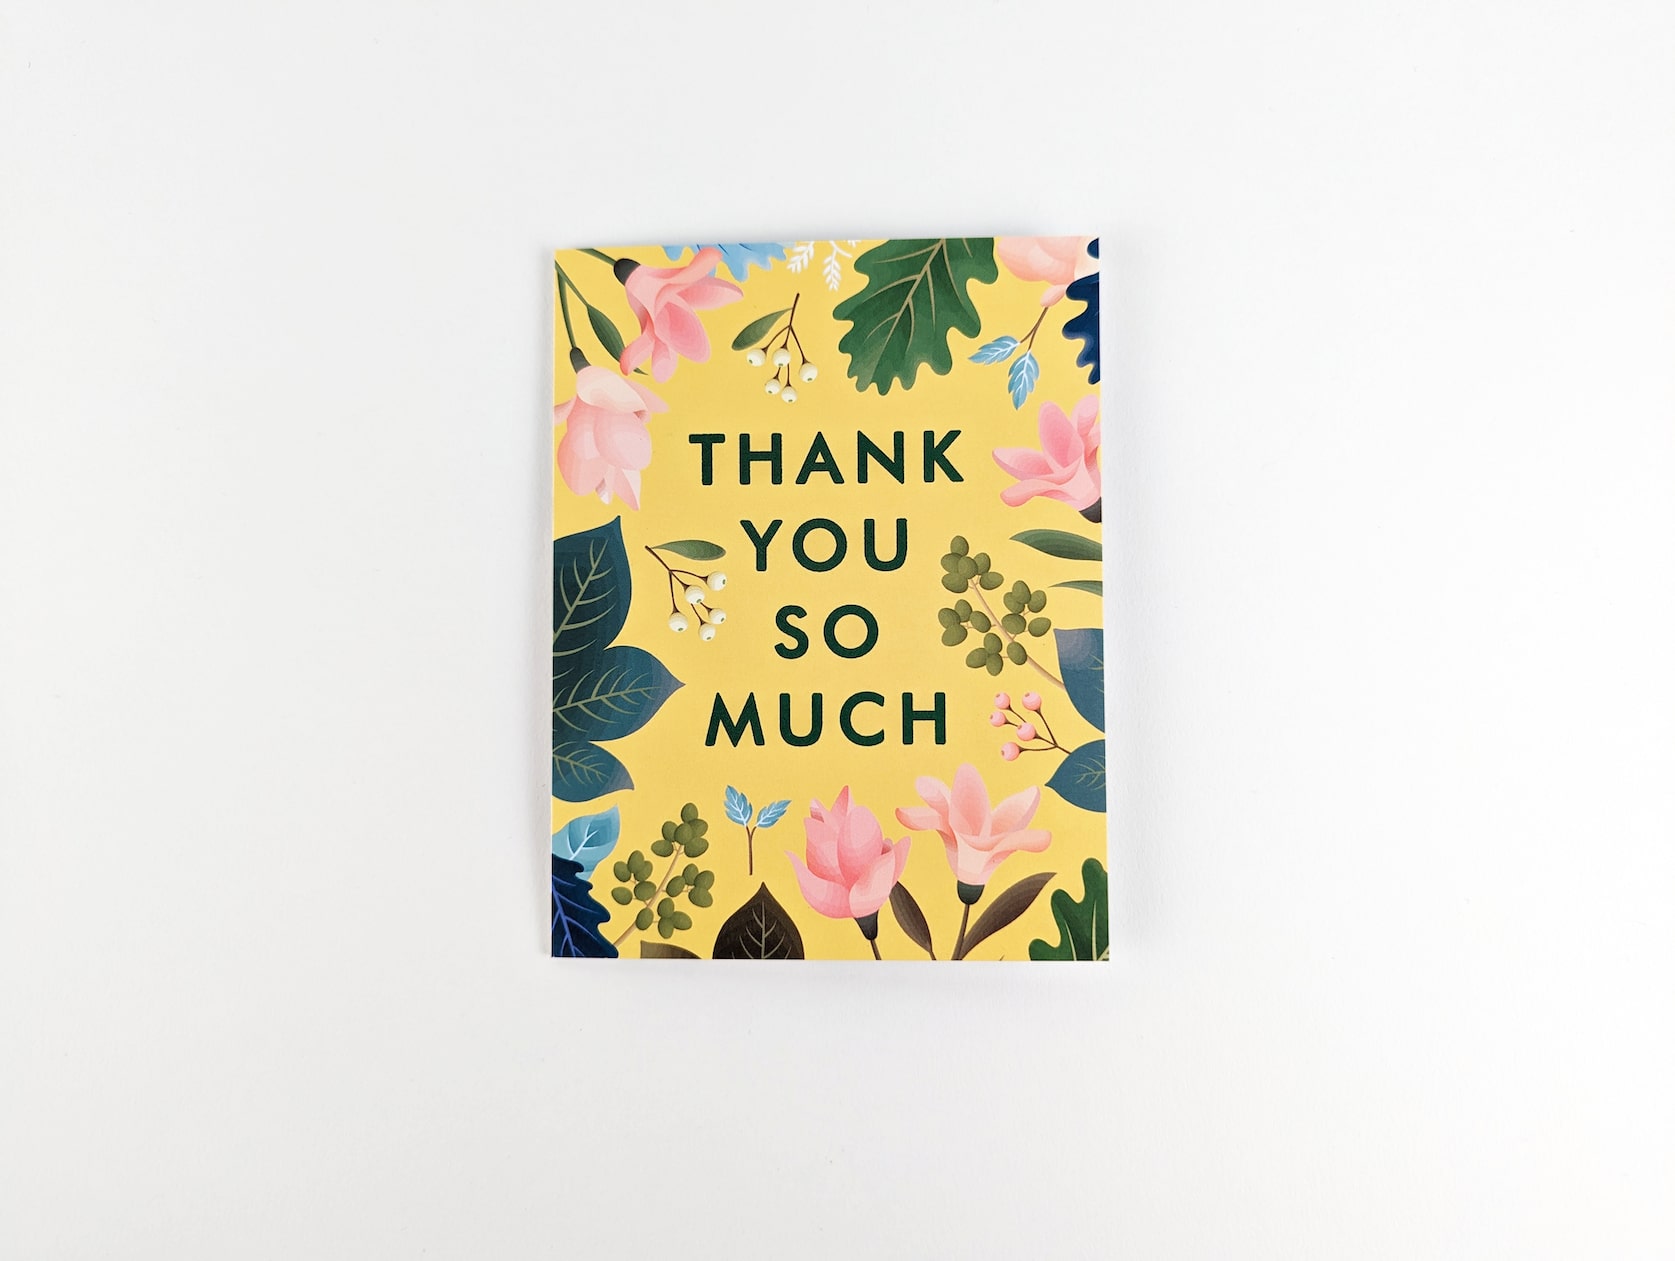 Yellow card with green text in the centre that reads: THANK YOU SO MUCH. A variety of pink flowers, green & blue leaves, white and pink berries with brown stems are featured around the text.